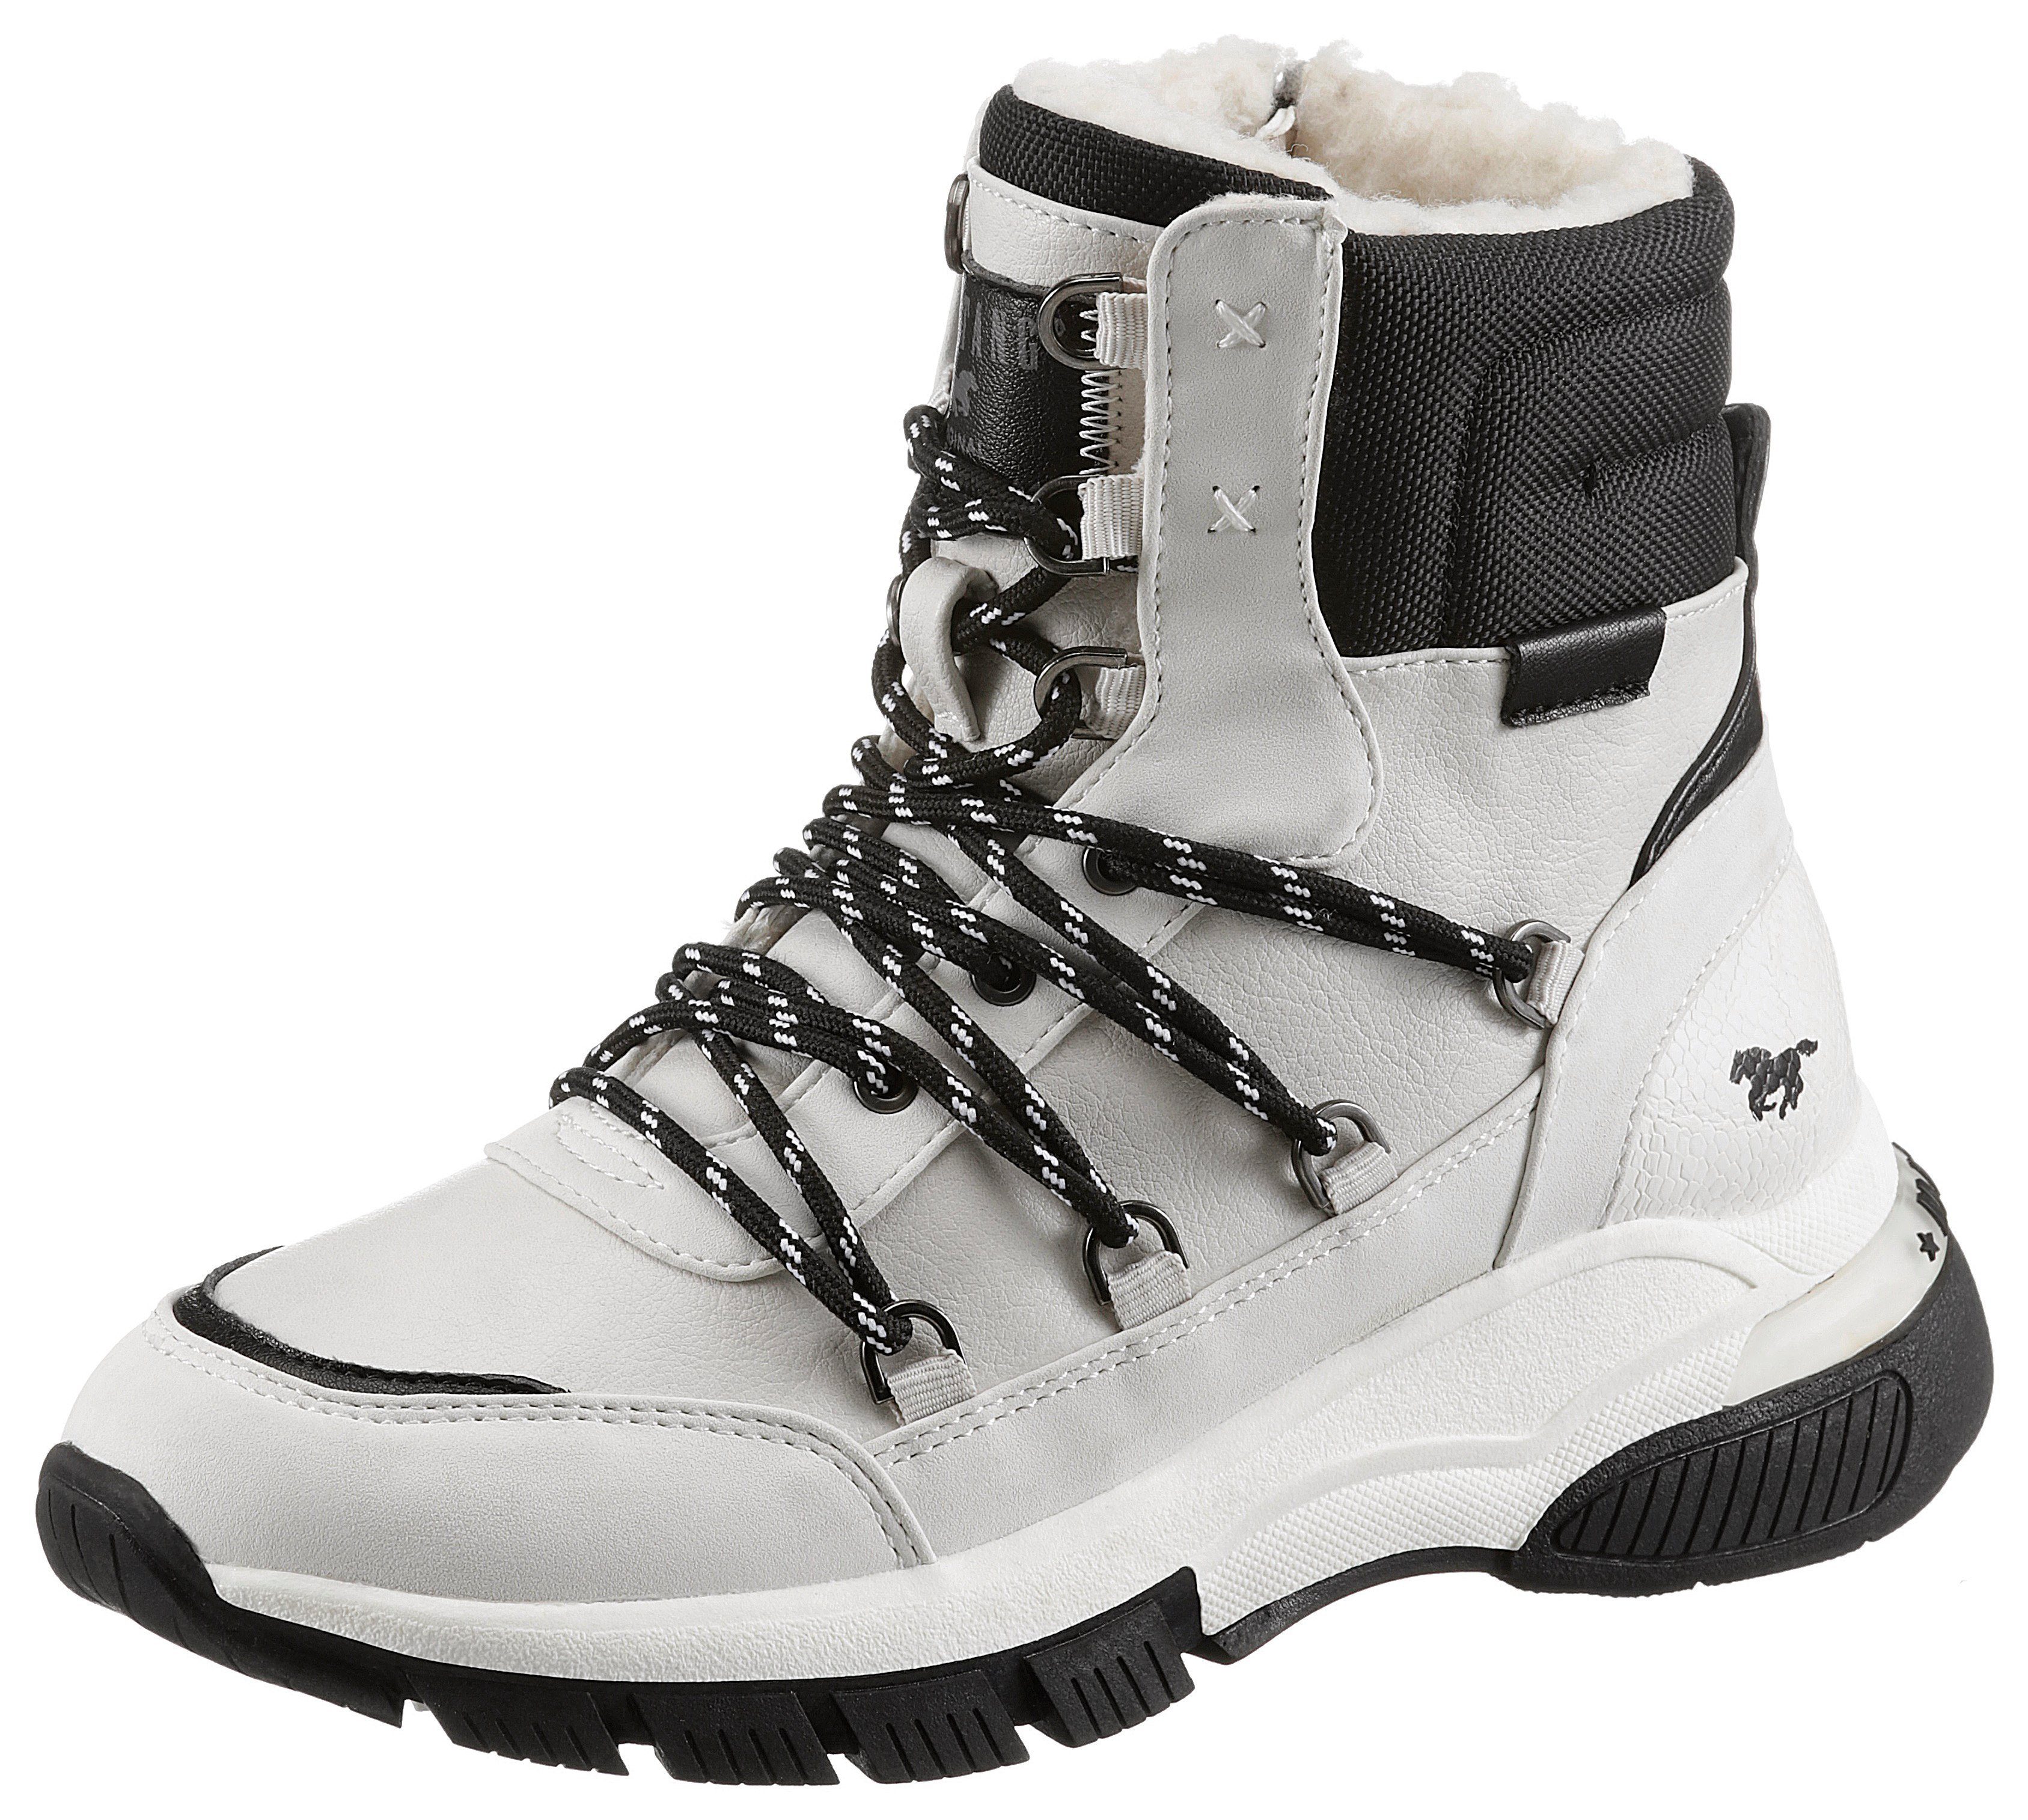 Mustang Shoes Winterboots mit zweifarbiger Laufsohle offwhite